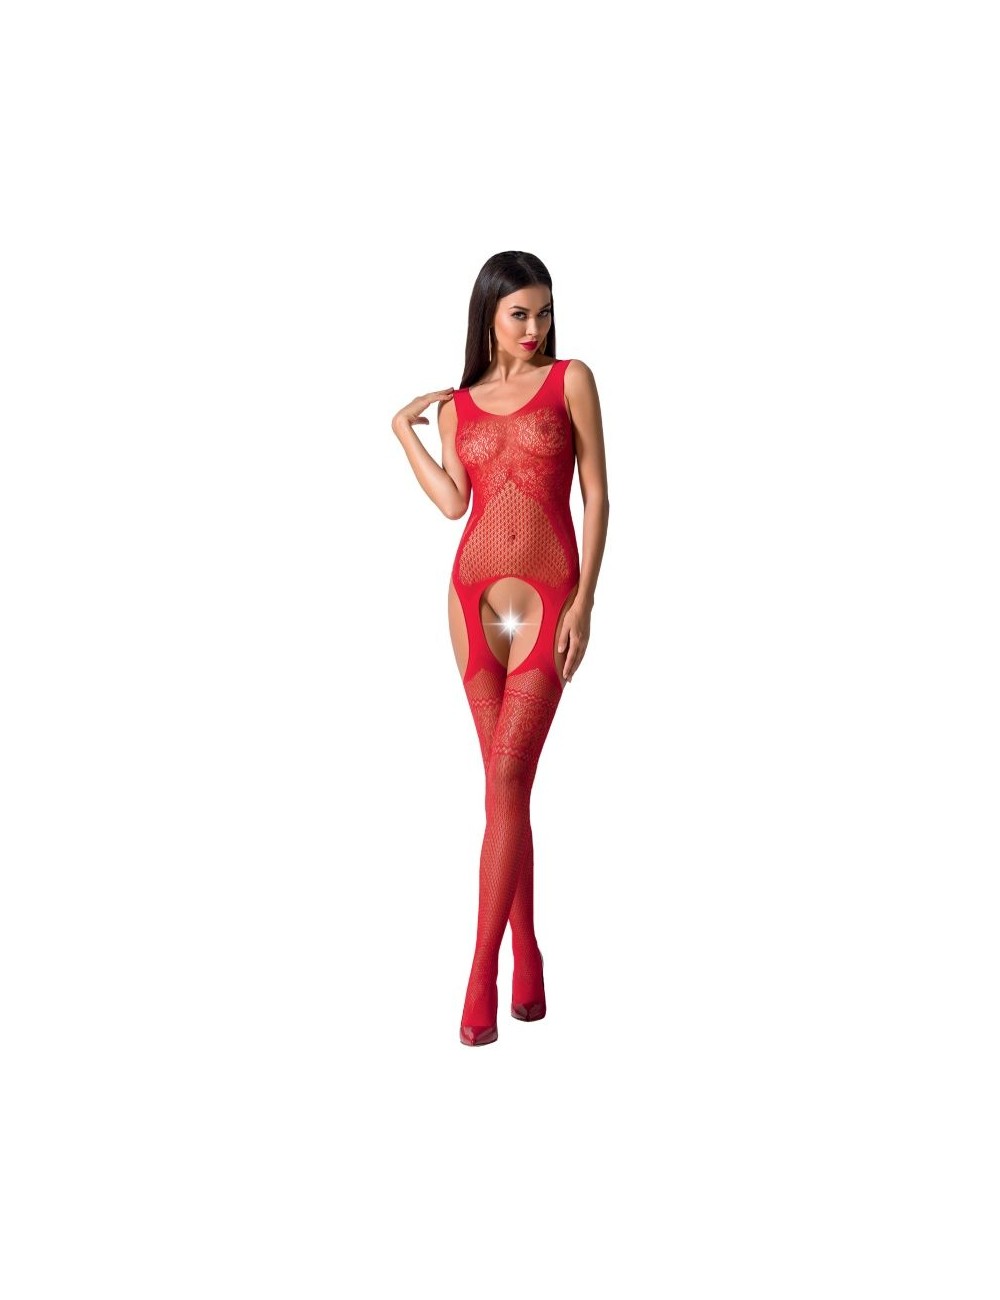 PASSION WOMAN BS061 BODYSTOCKING RED ONE SIZE